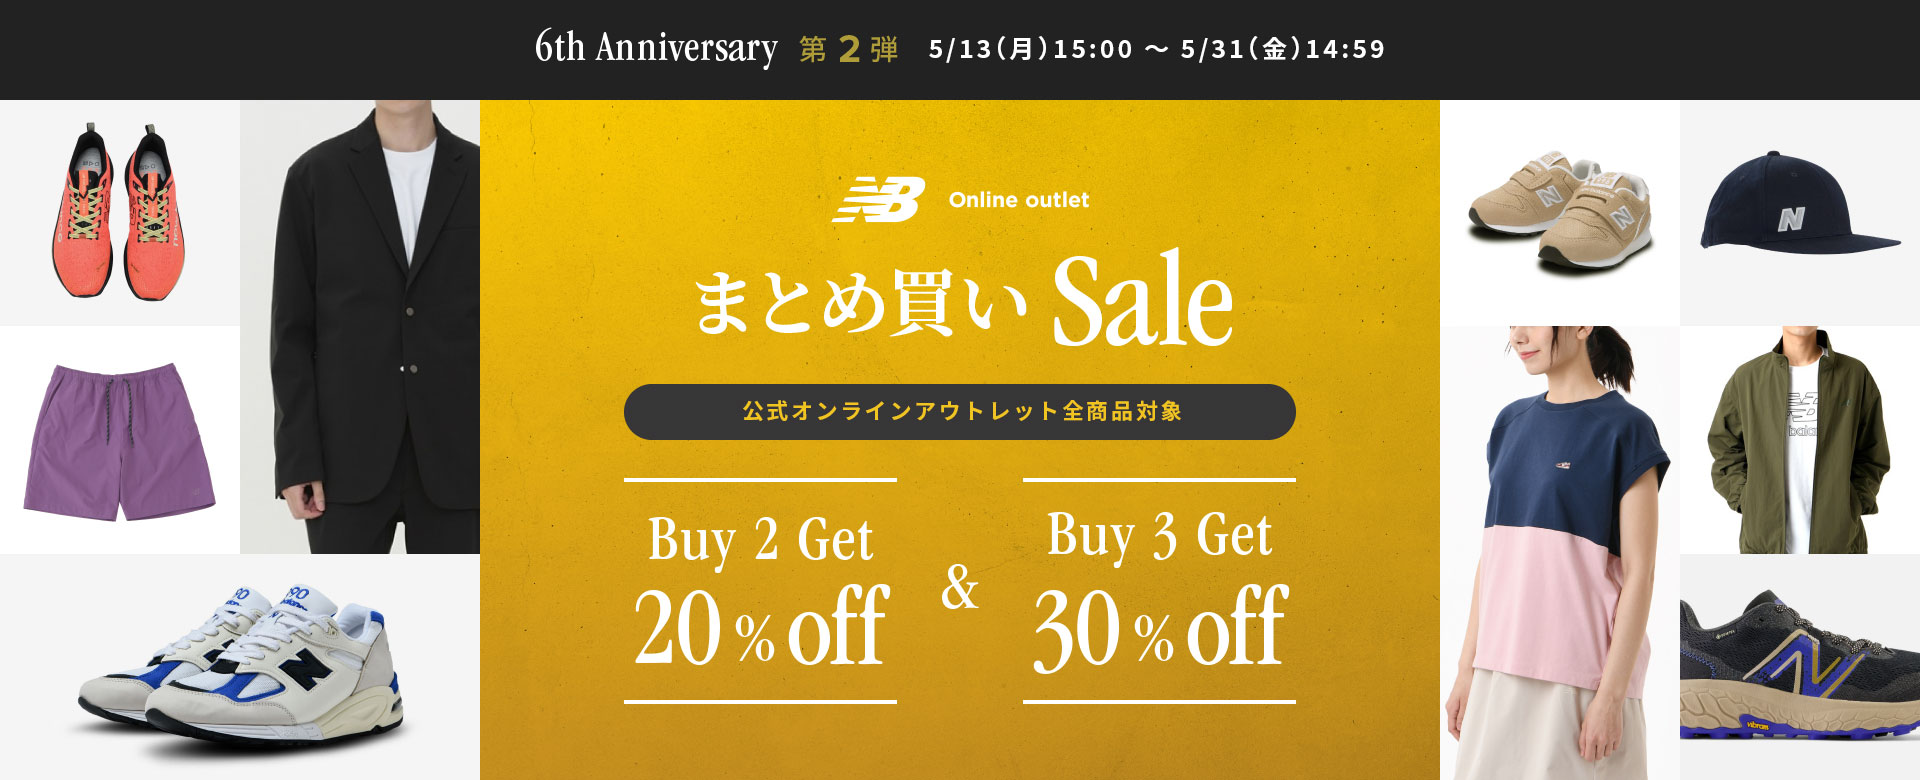 6th Anniversary 第2弾 5/13（月）15:00 ～ 5/31（金）14:59 NB Online outlet まとめ買いSALE. Buy 2Get 20%off & Buy 3Get 30%off. 公式オンラインアウトレット全商品対象